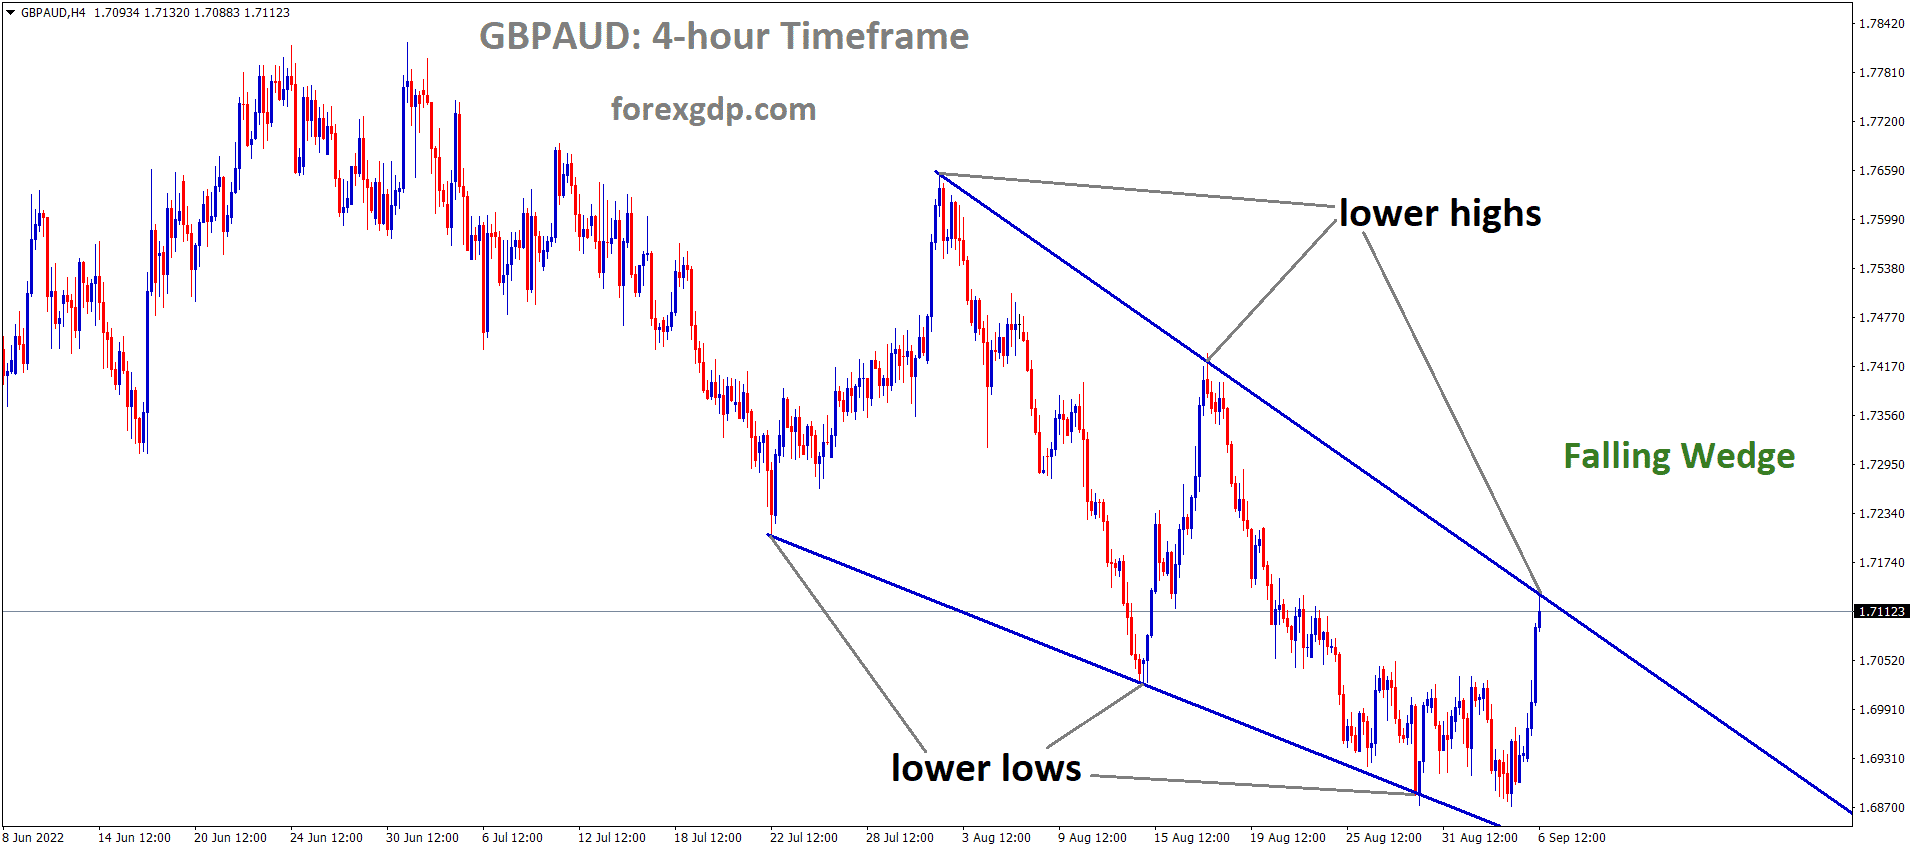 GBPAUD is moving in the Falling wedge pattern and the market has reached the lower high area of the pattern